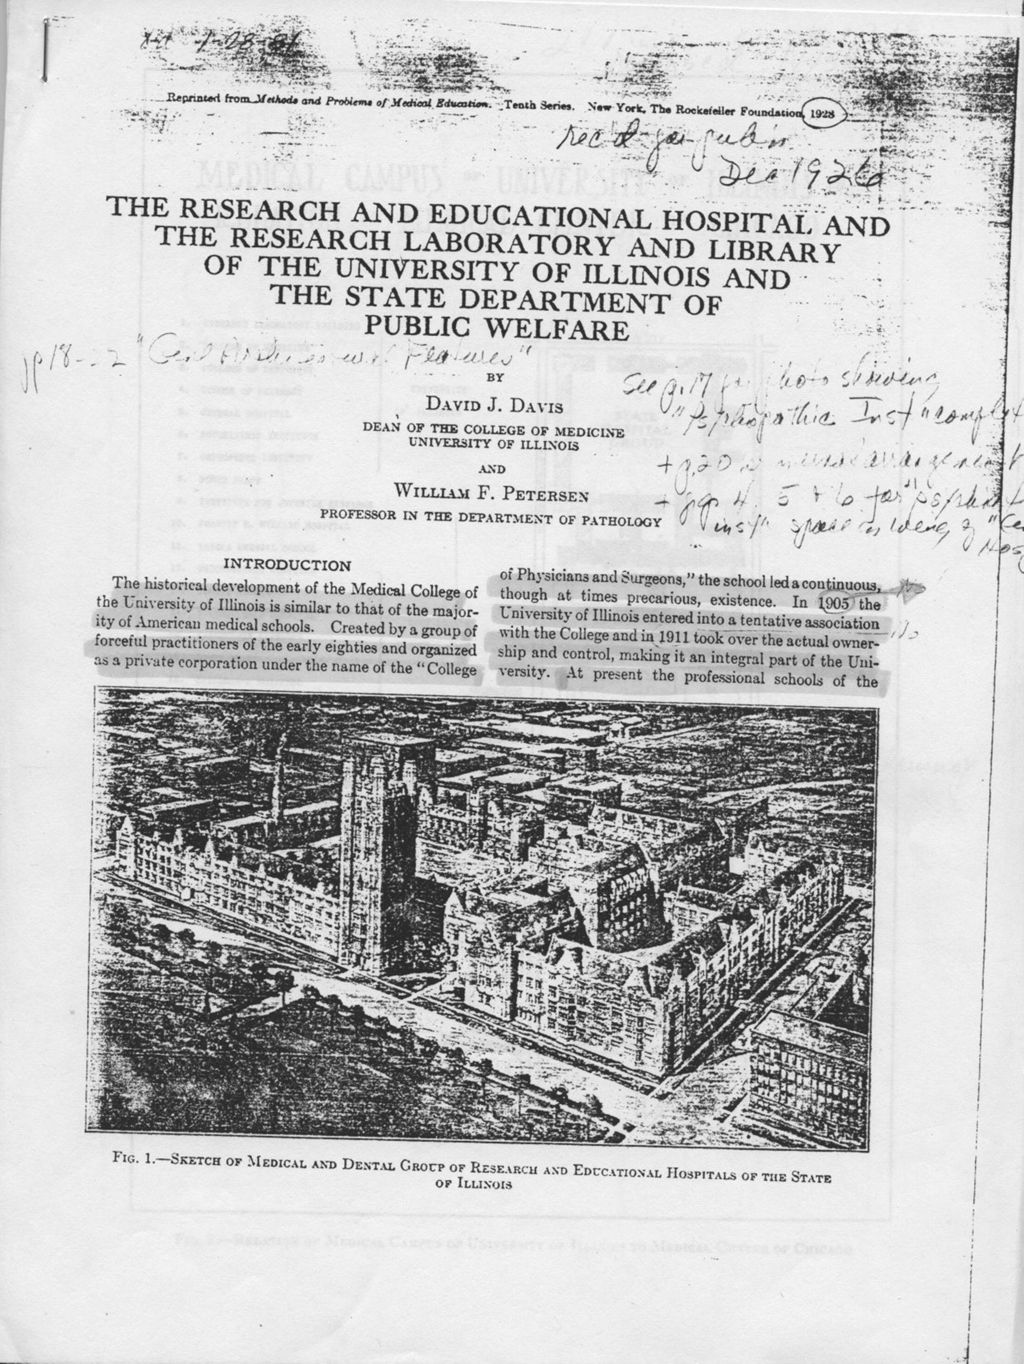 The Research and Educational Hospital and the Research Laboratory and Library of the University of Illinois and the State Department of Public Welfare